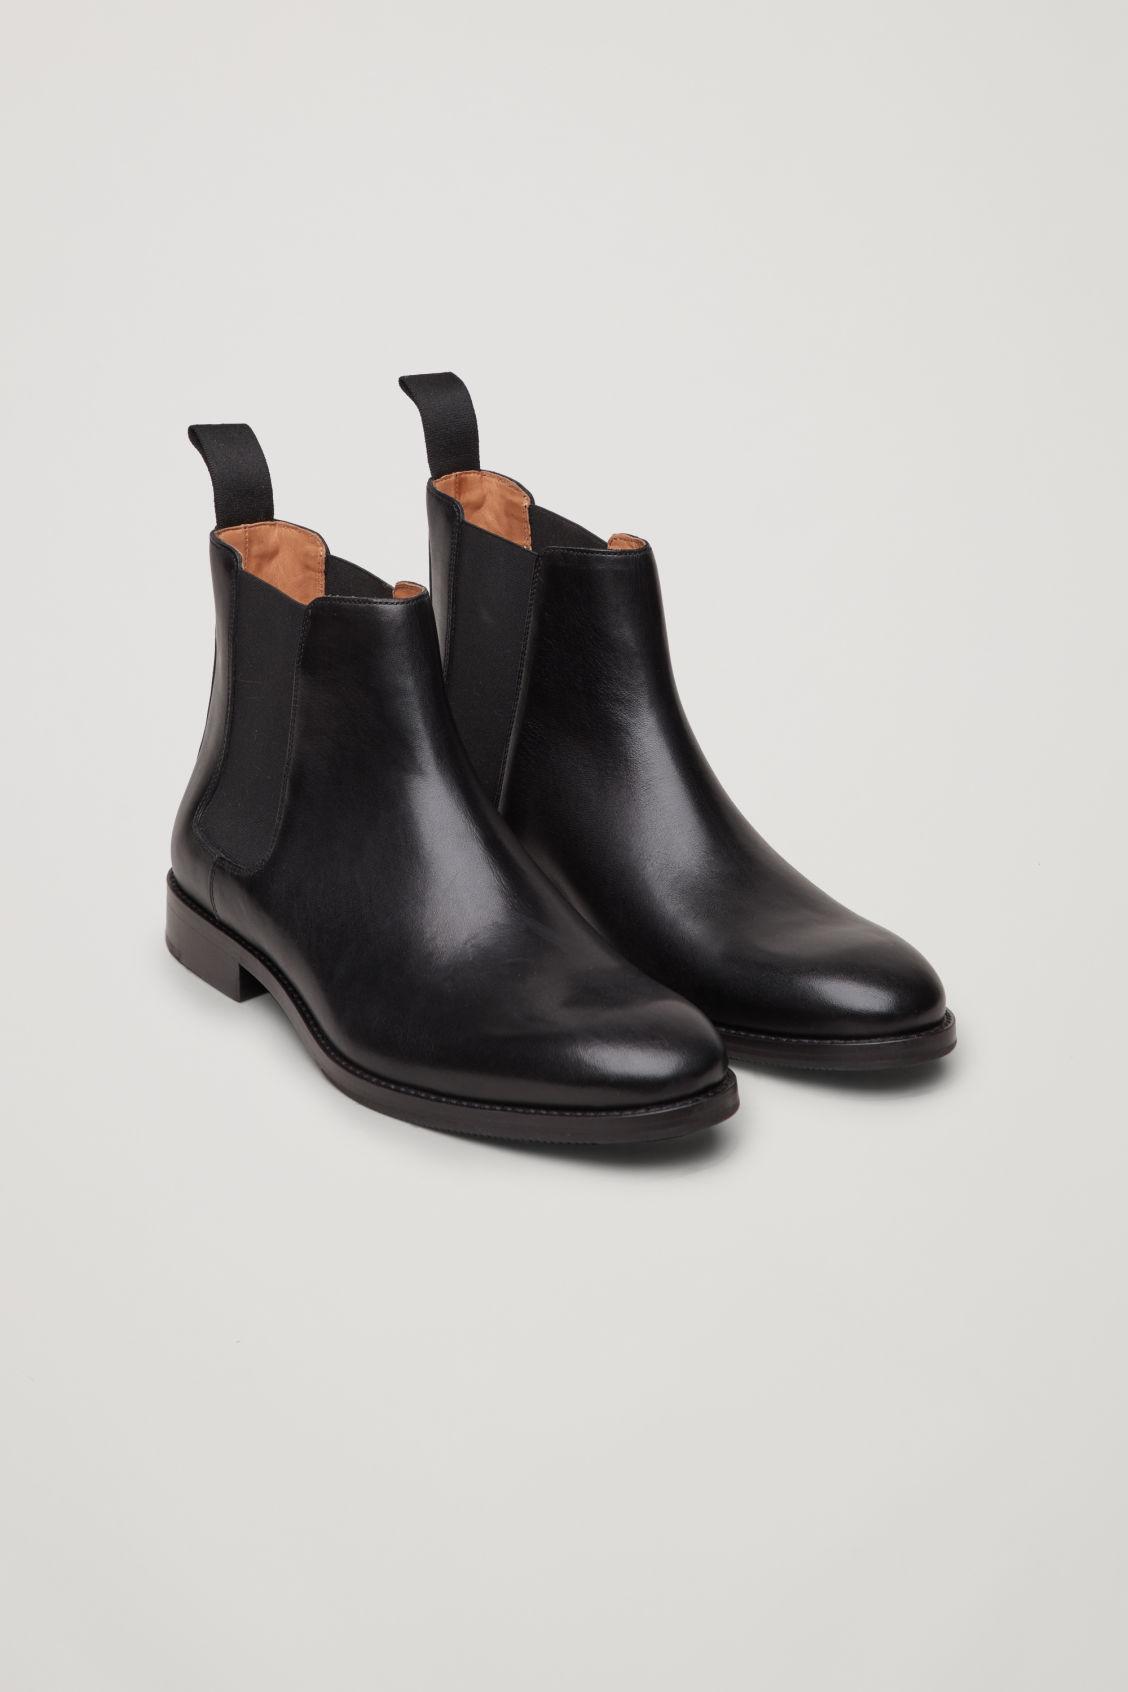 COS Leather Chelsea Boots in Black for Men |